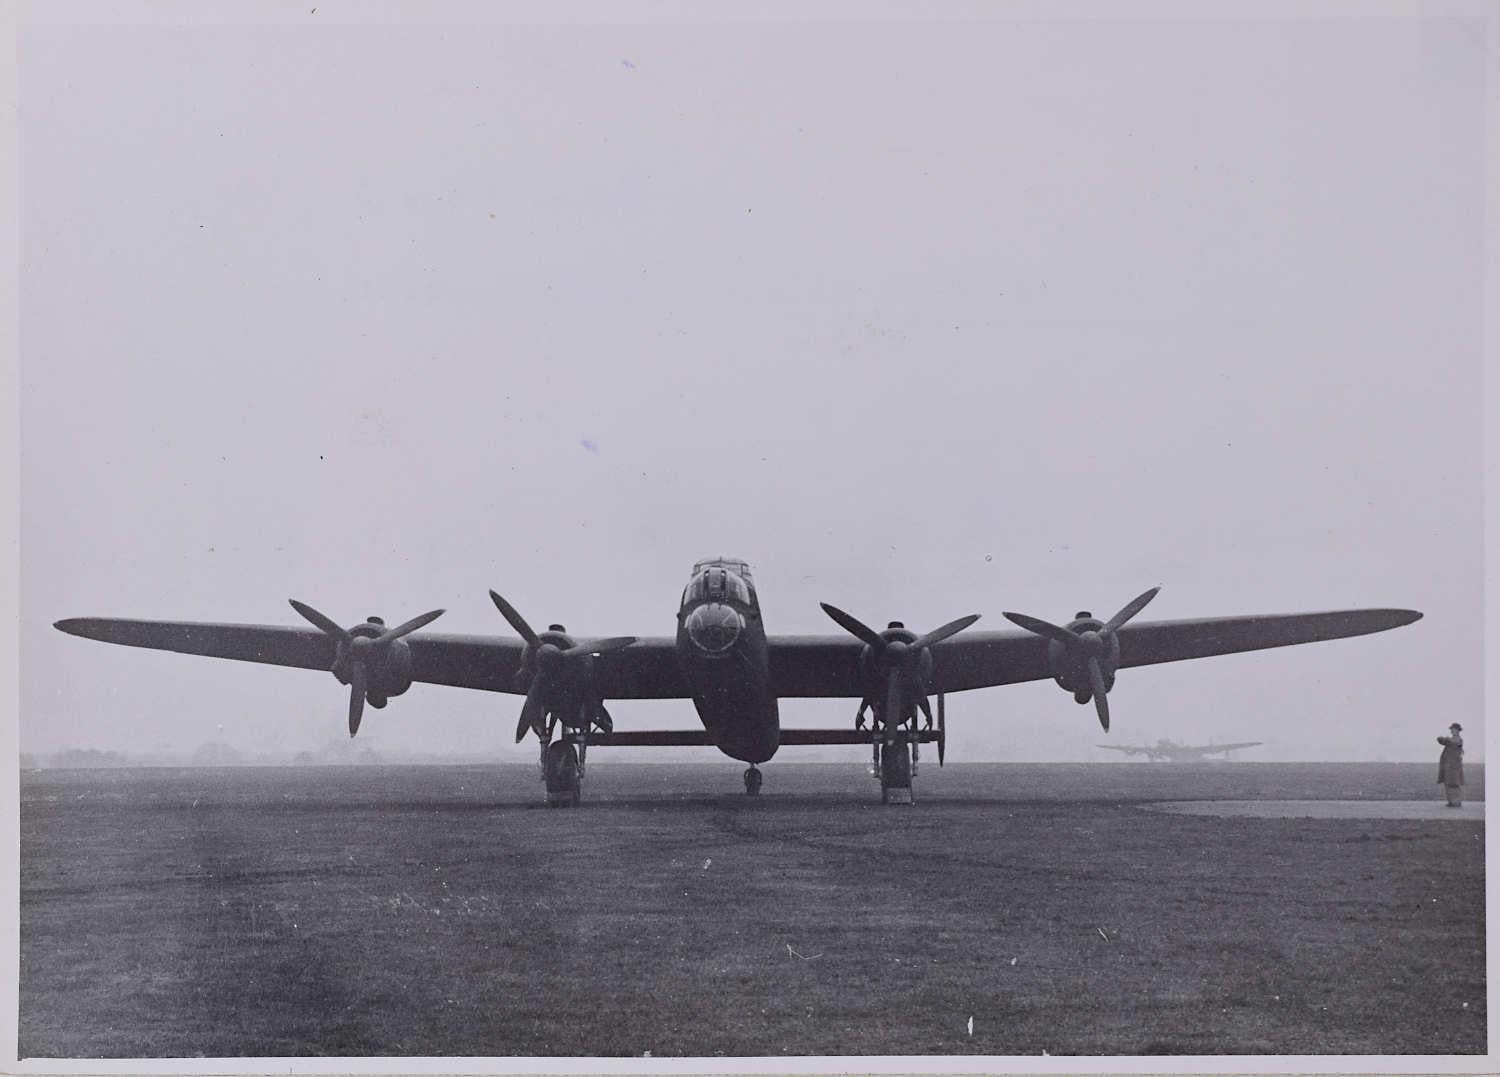 Unknown Black and White Photograph - Avro Lancaster Bomber at dispersal point 1943 original silver gelatin photograph